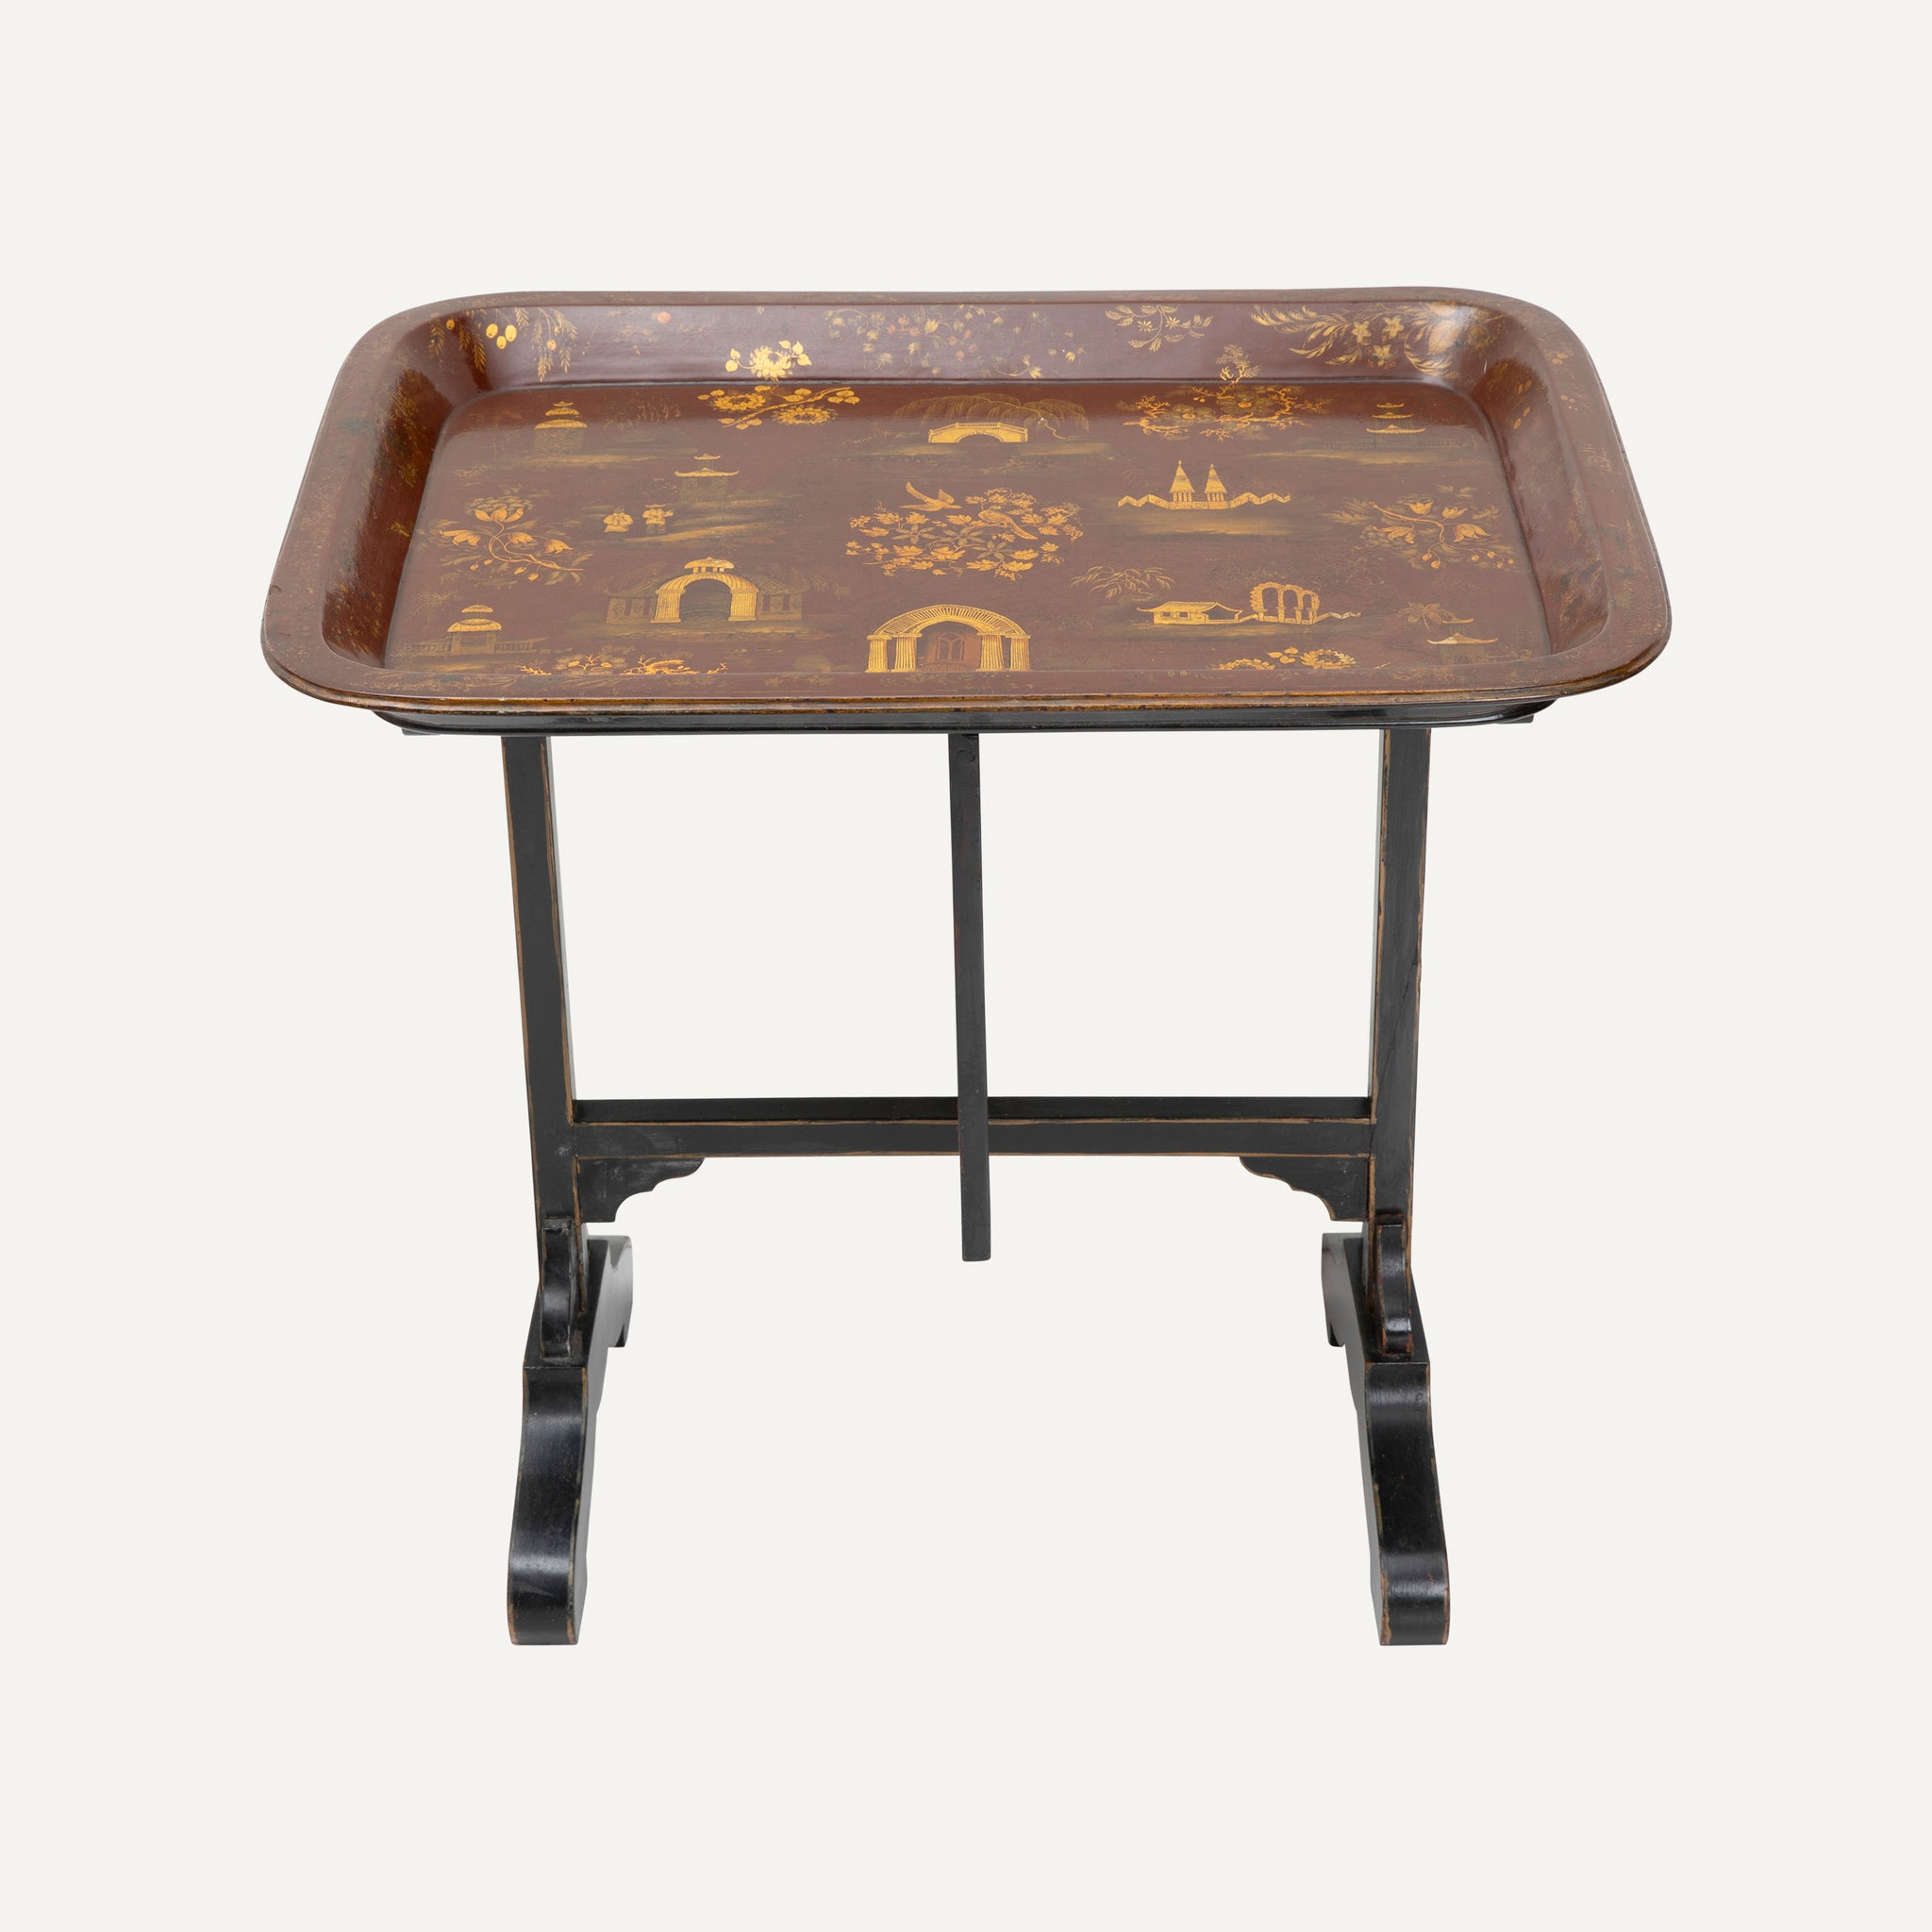 ANTIQUE TOLE TRAY TABLE